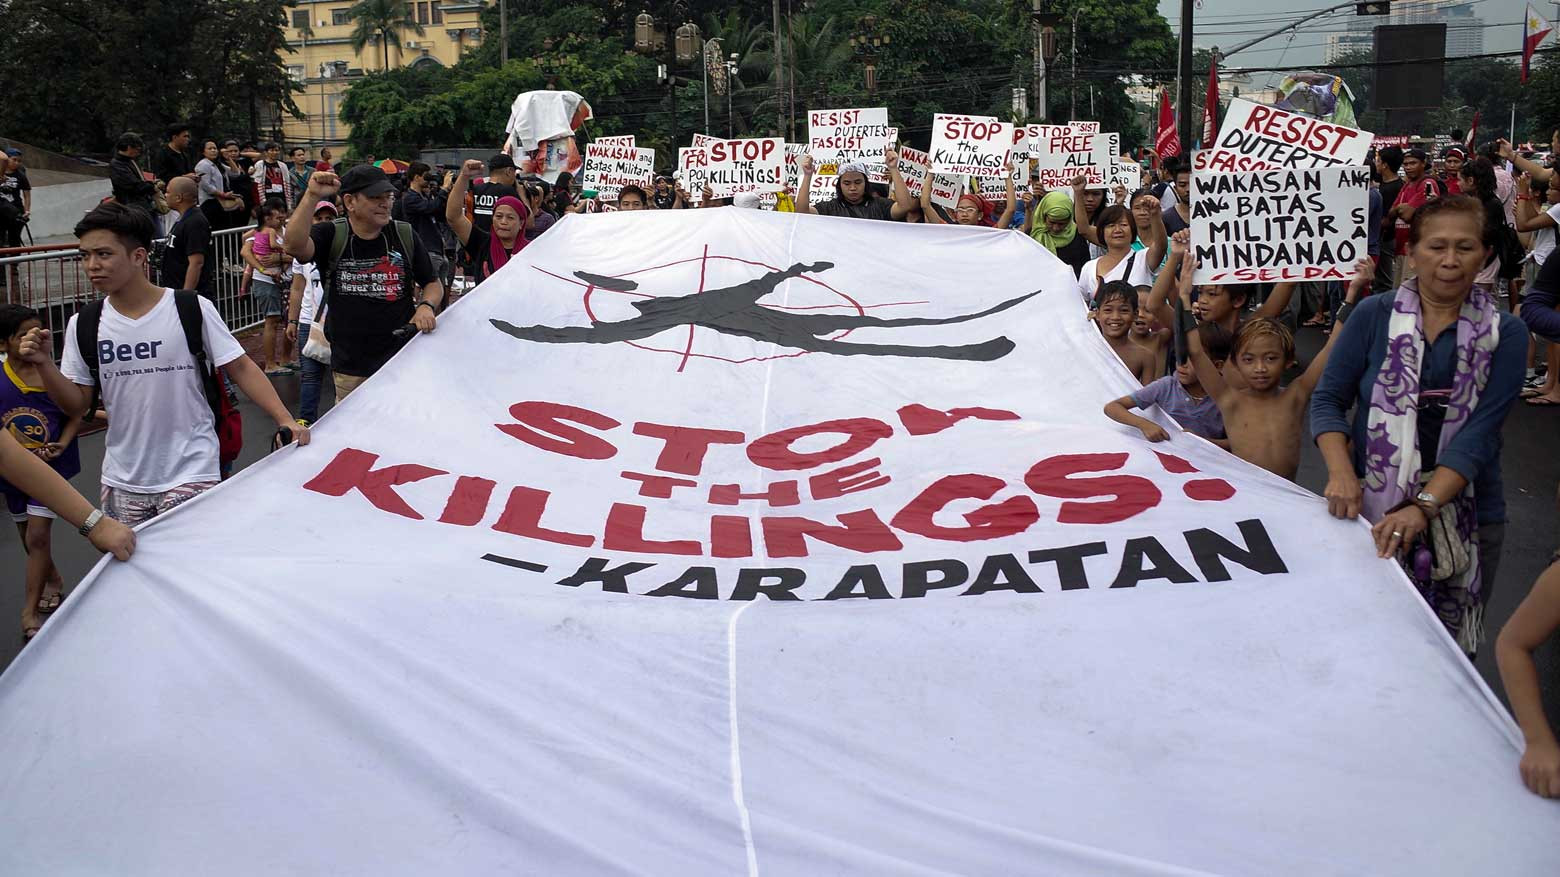 Voices for justice drowned out in Philippines’ drug war